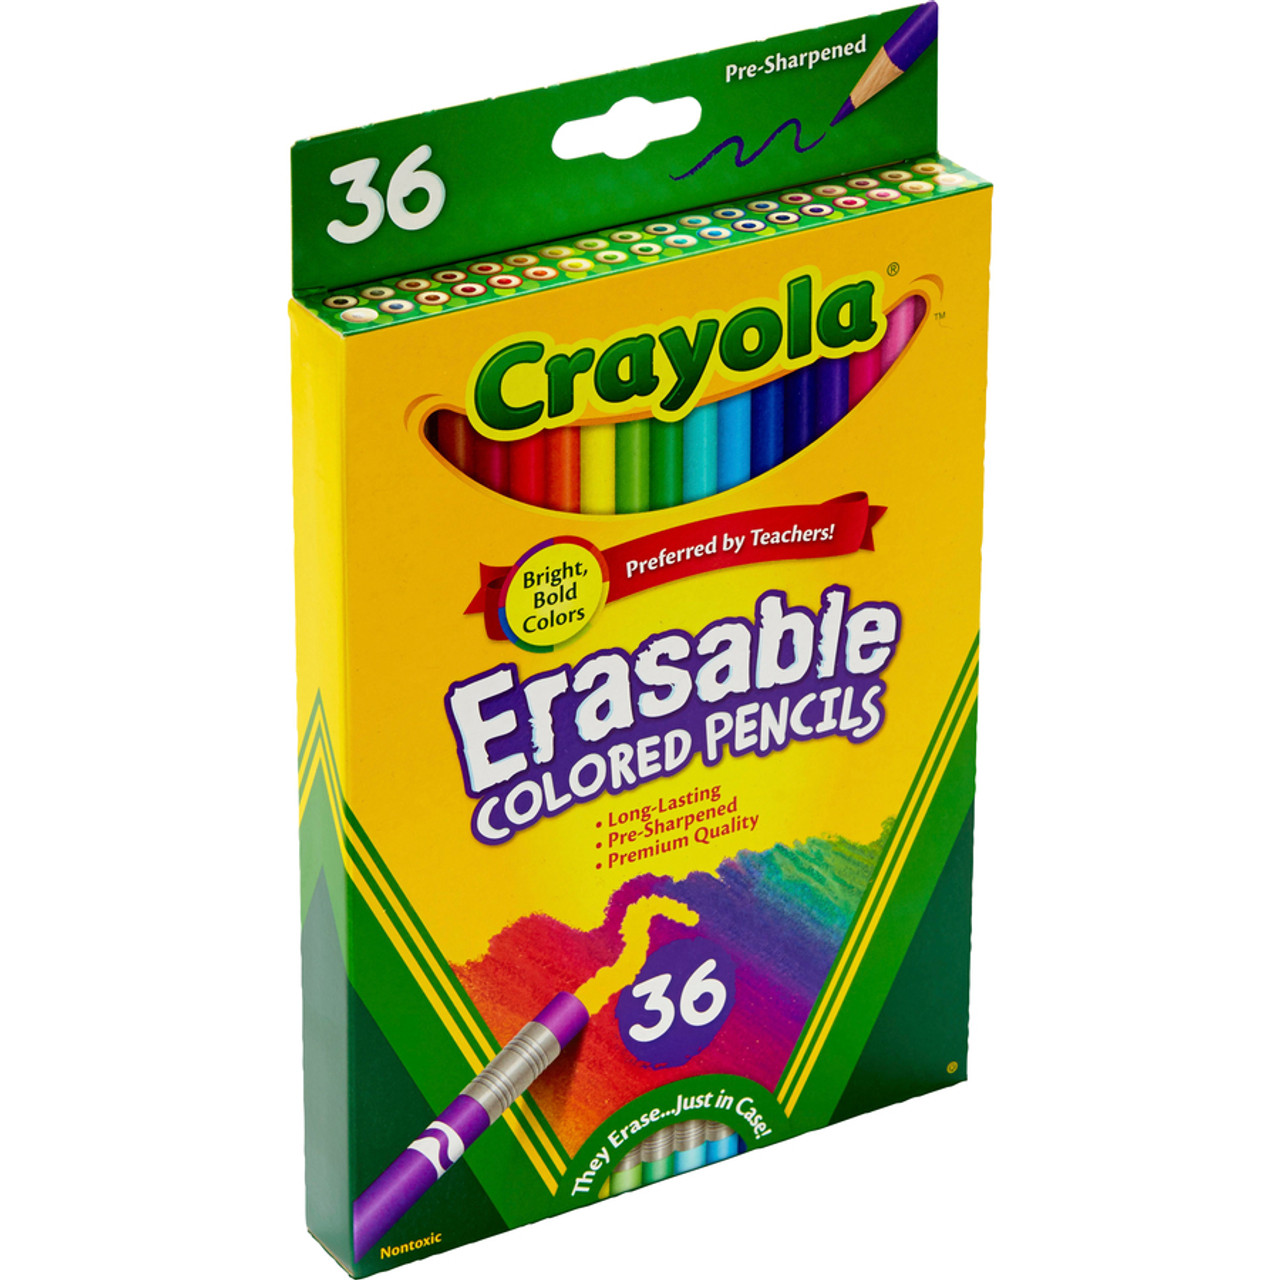 Colored Pencils Crayons in Bulk Environmental Protection High